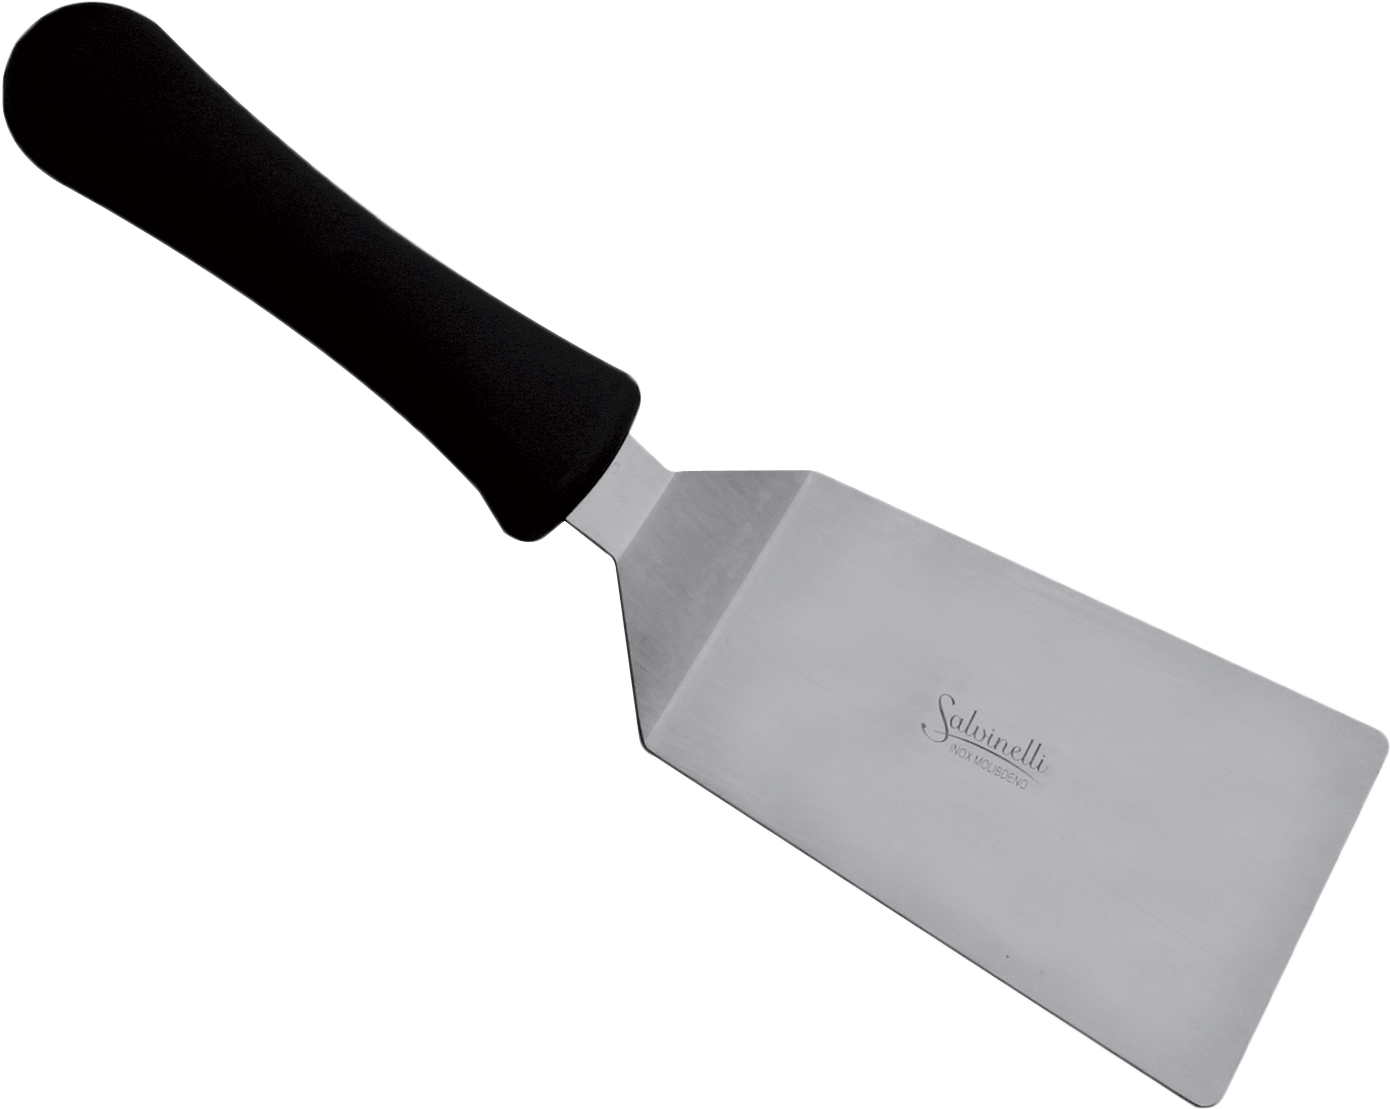 Download Pie Spatula Spatula Png Image With No Background Pngkey Com